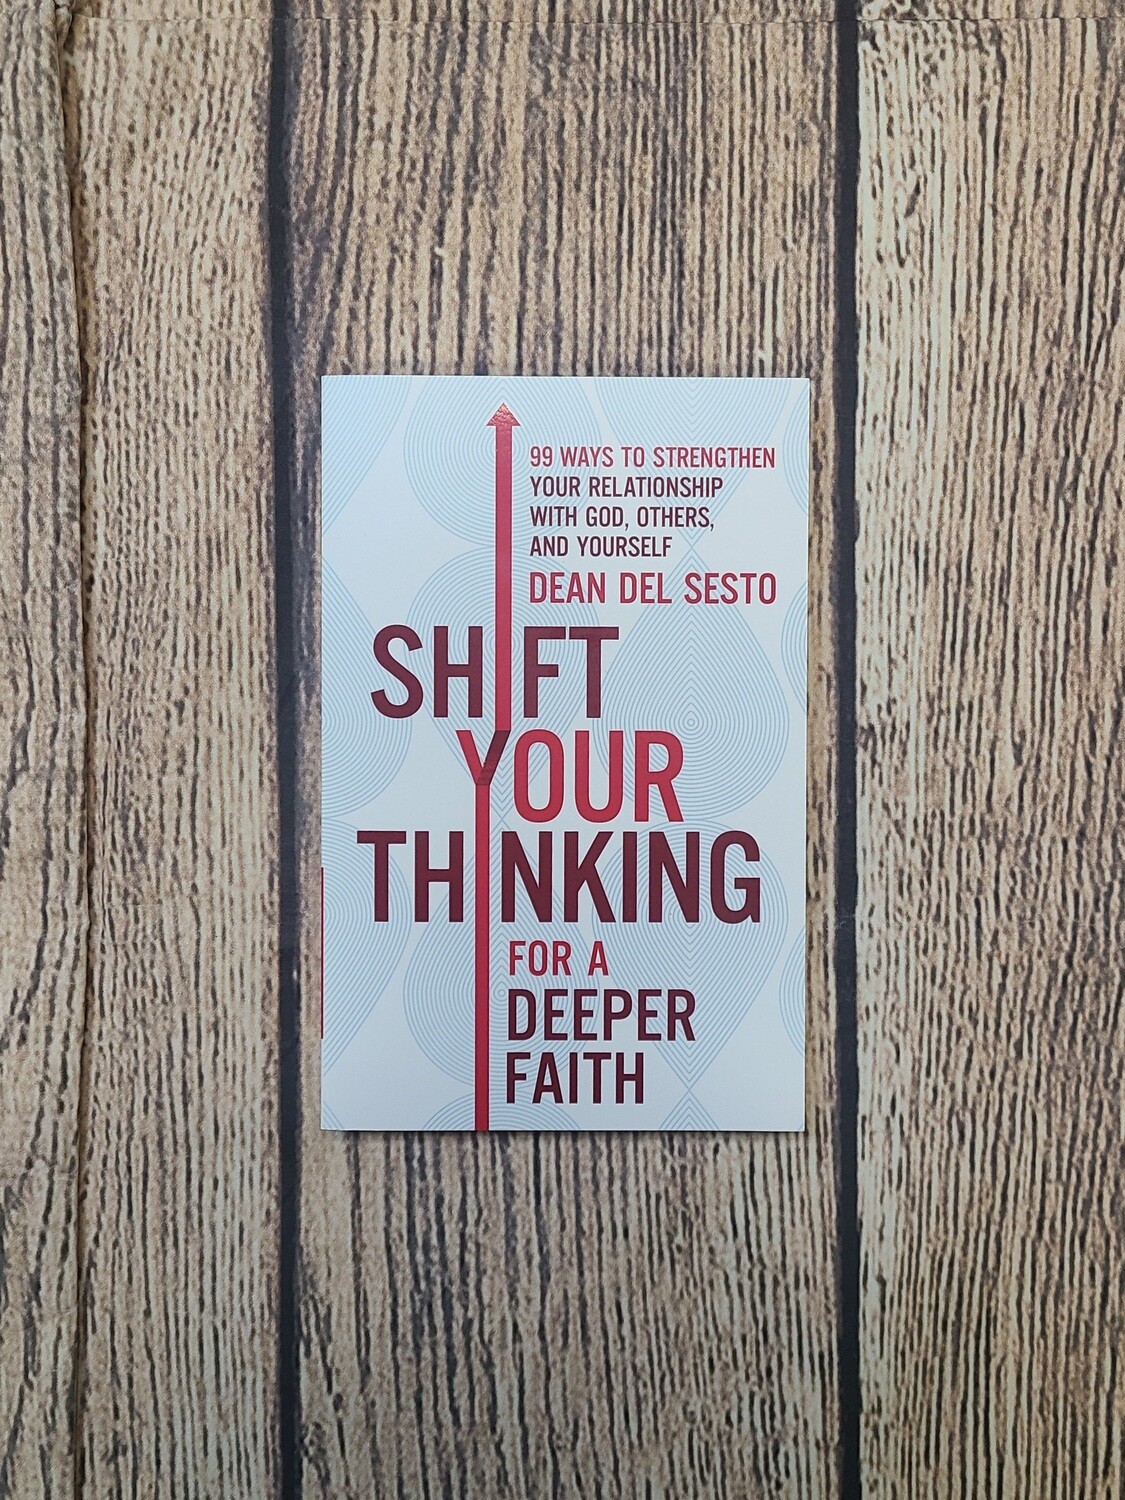 Shift Your Thinking for a Deeper Faith: 99 Ways to Strengthen Your Relationship with God, Others, and Yourself by Dean Del Sesto